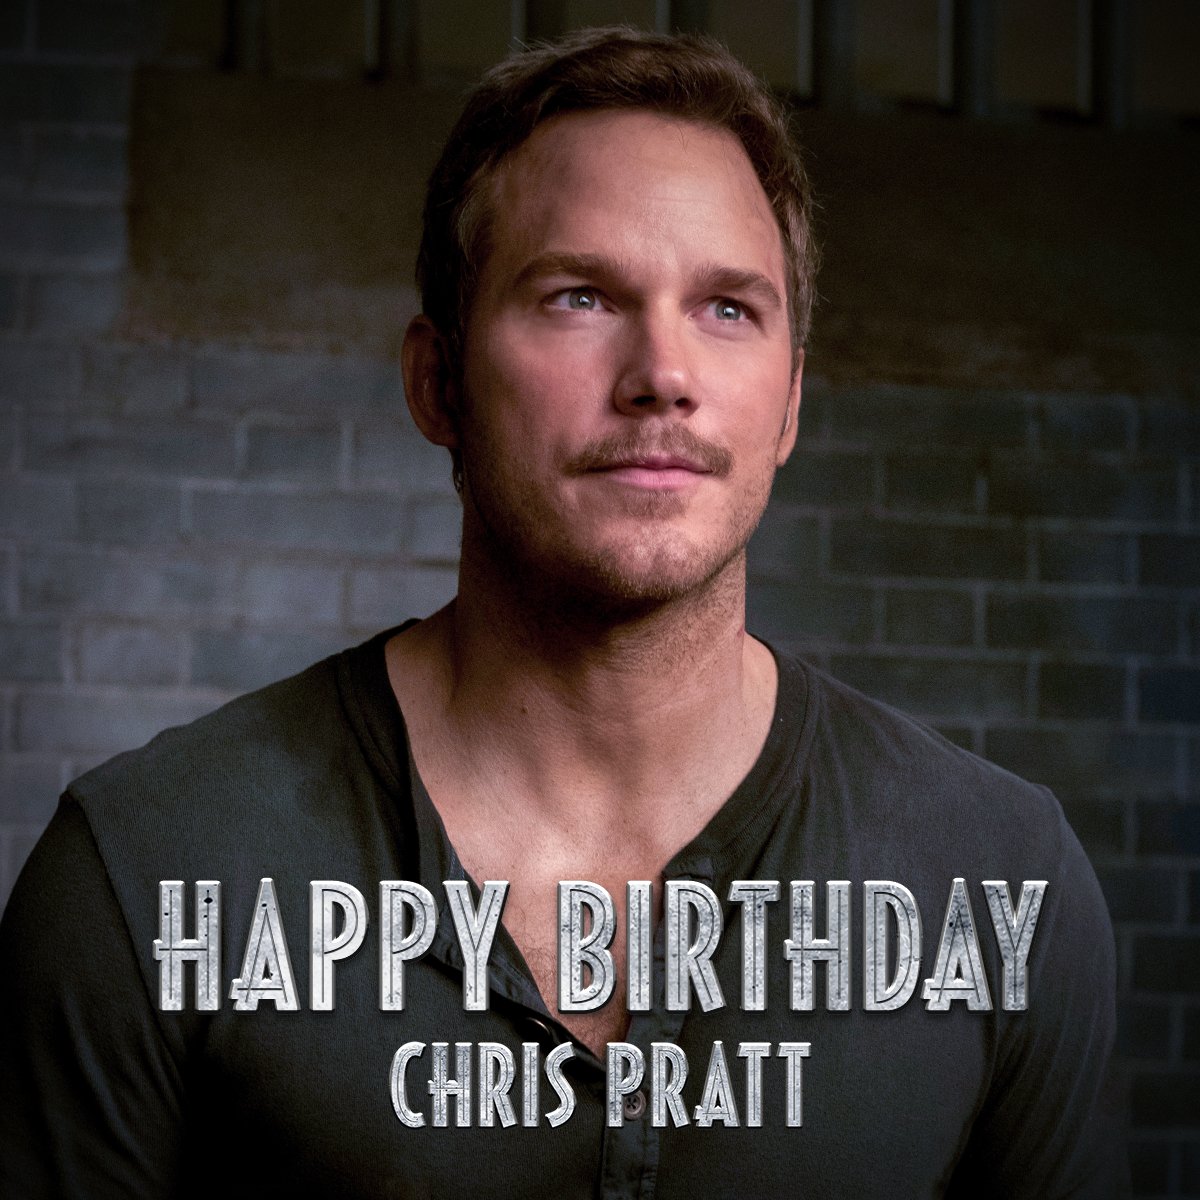 Happy Birthday to Chris Pratt! Cheers and we hope your diet allows for tequila. 